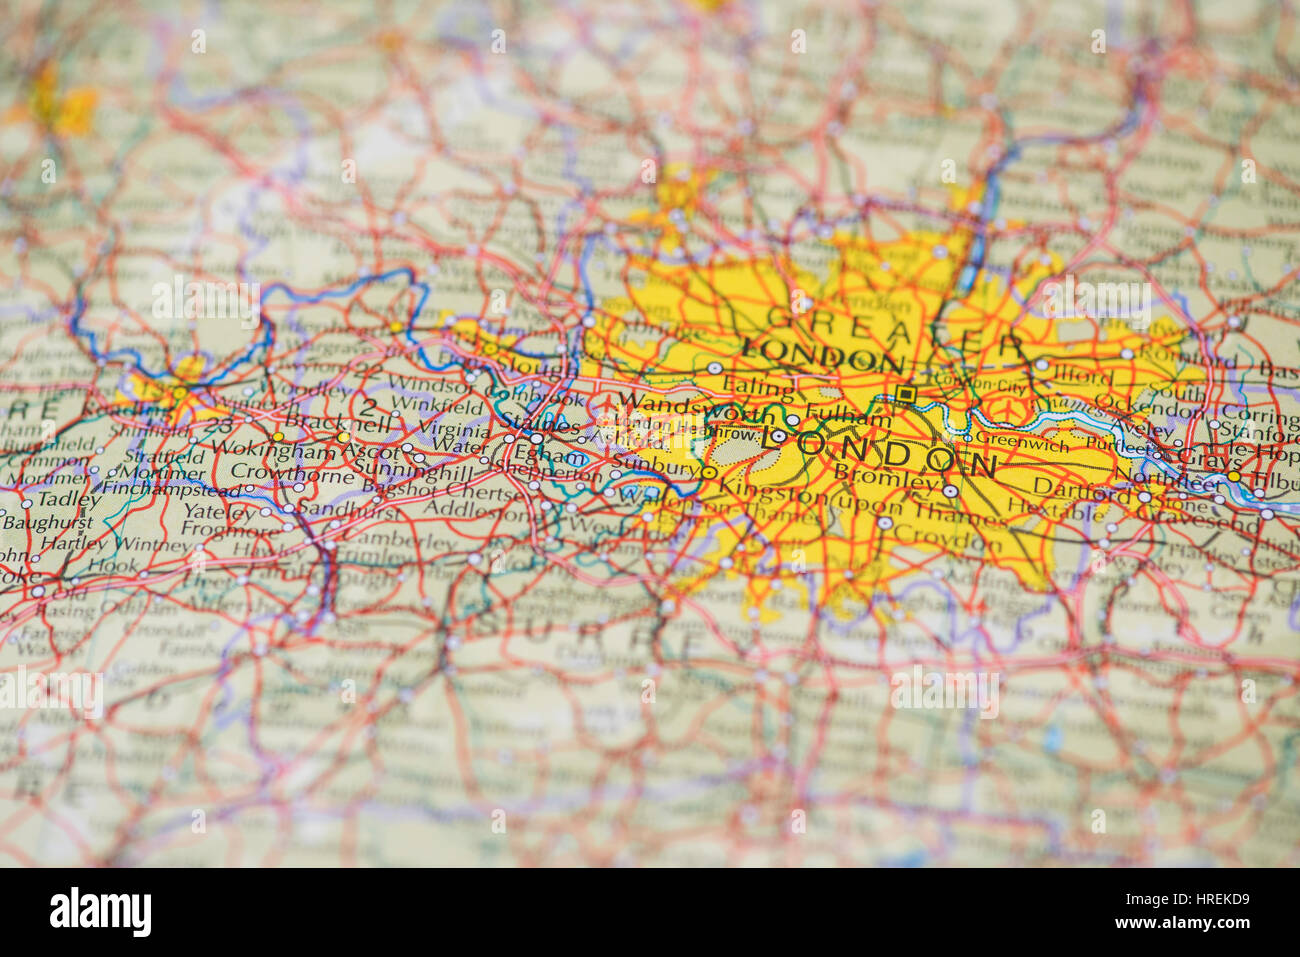 England map showing the city of London Stock Photo